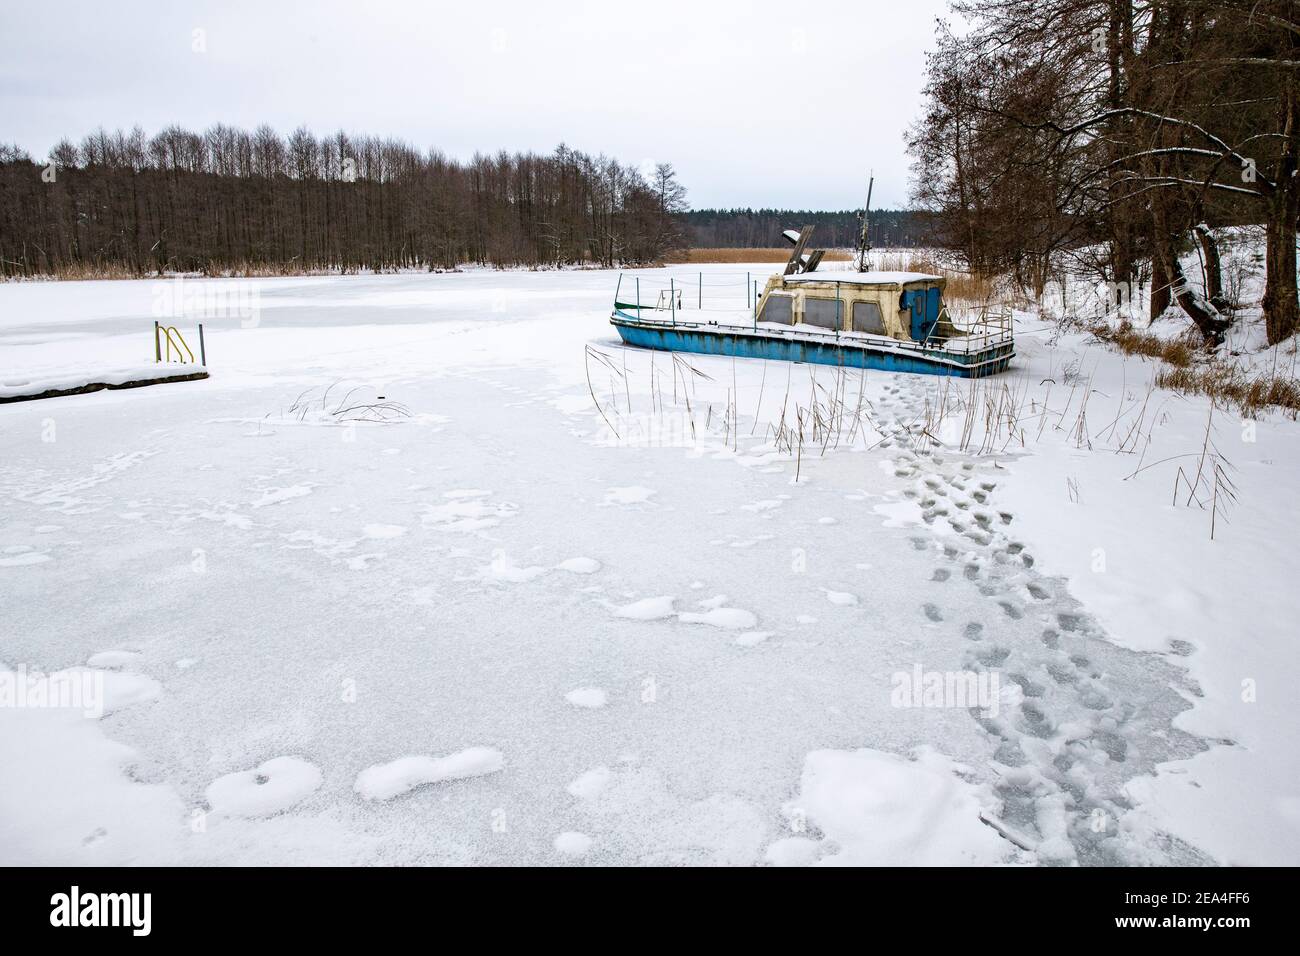 A large boat trapped in ice on a lake. A frozen lake in a boat dock. Winter season. Stock Photo